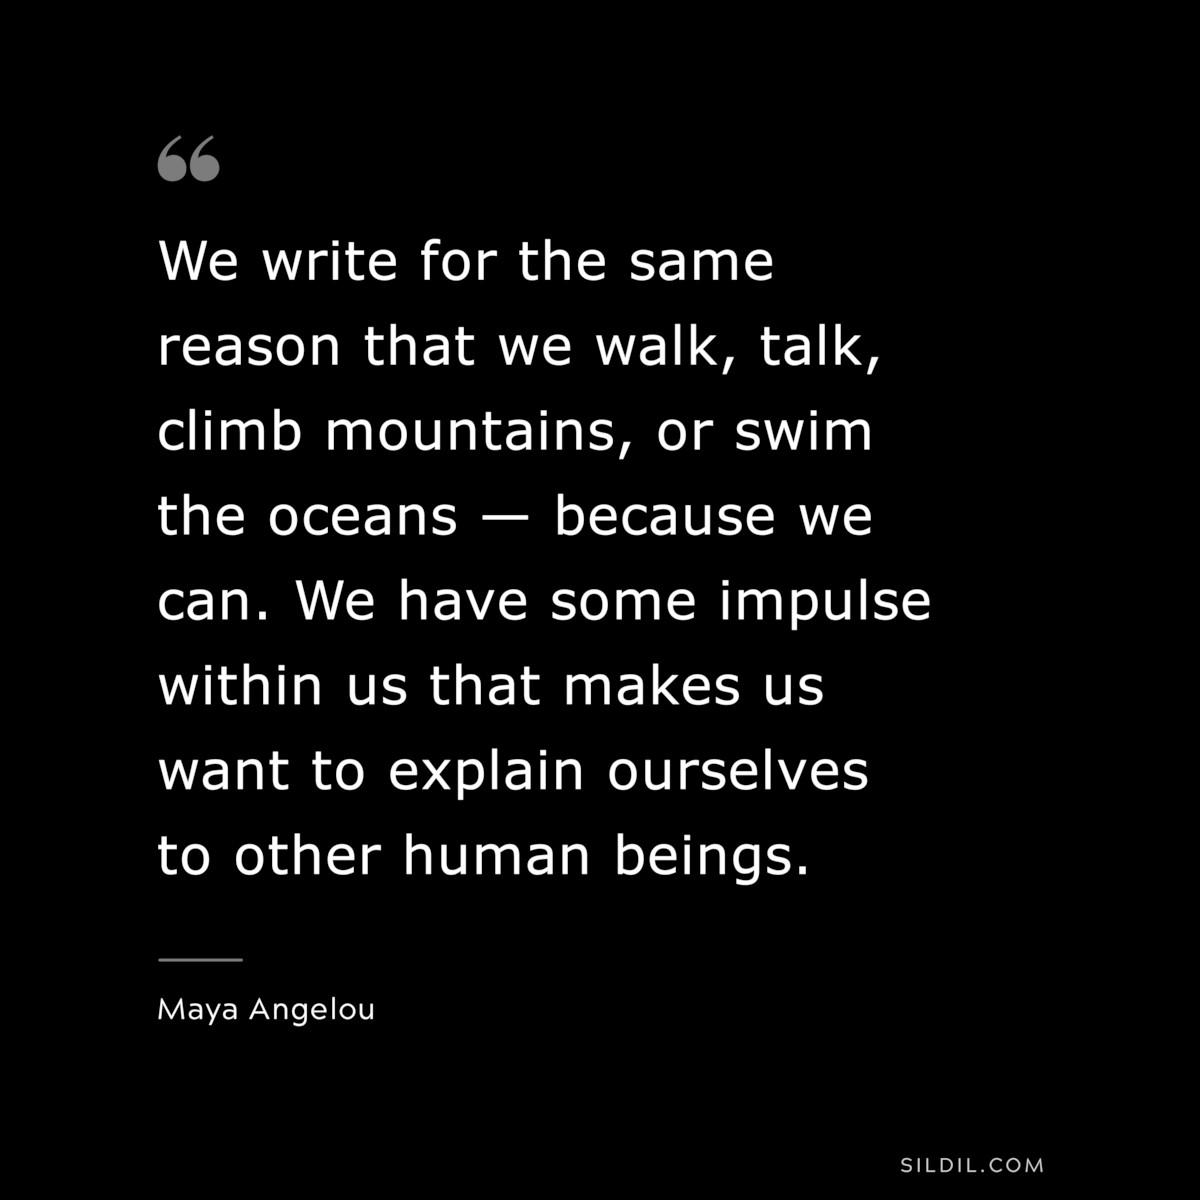 We write for the same reason that we walk, talk, climb mountains, or swim the oceans — because we can. We have some impulse within us that makes us want to explain ourselves to other human beings. ― Maya Angelou